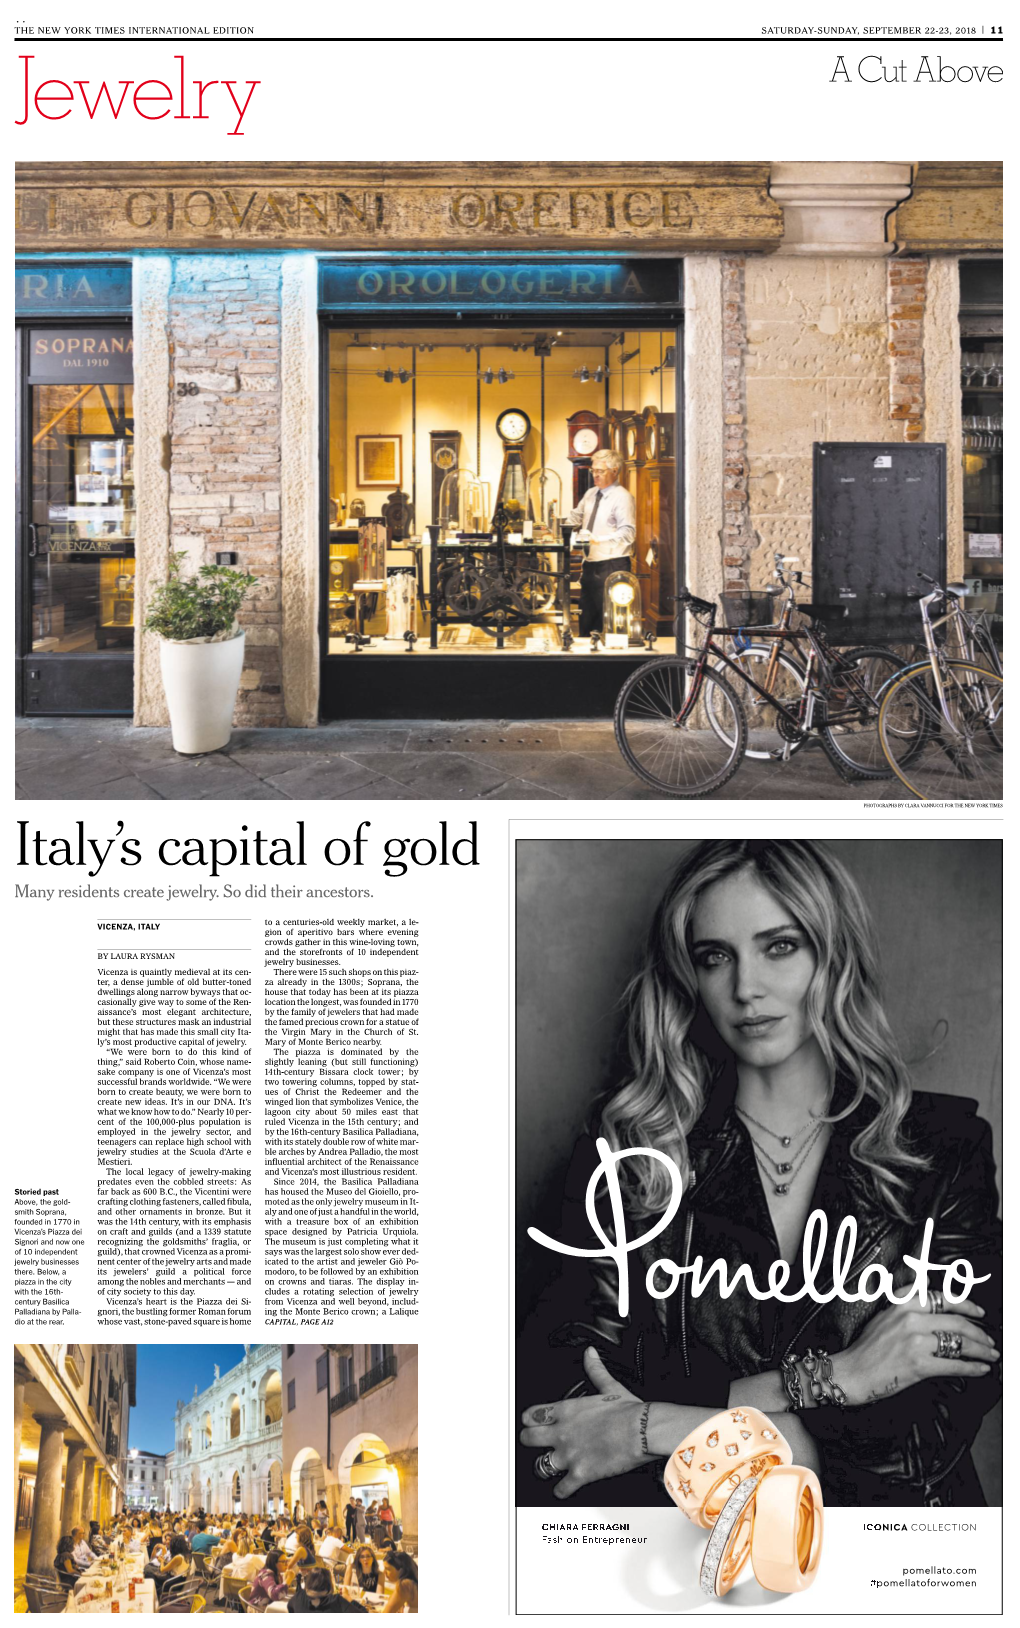 Italy's Capital of Gold